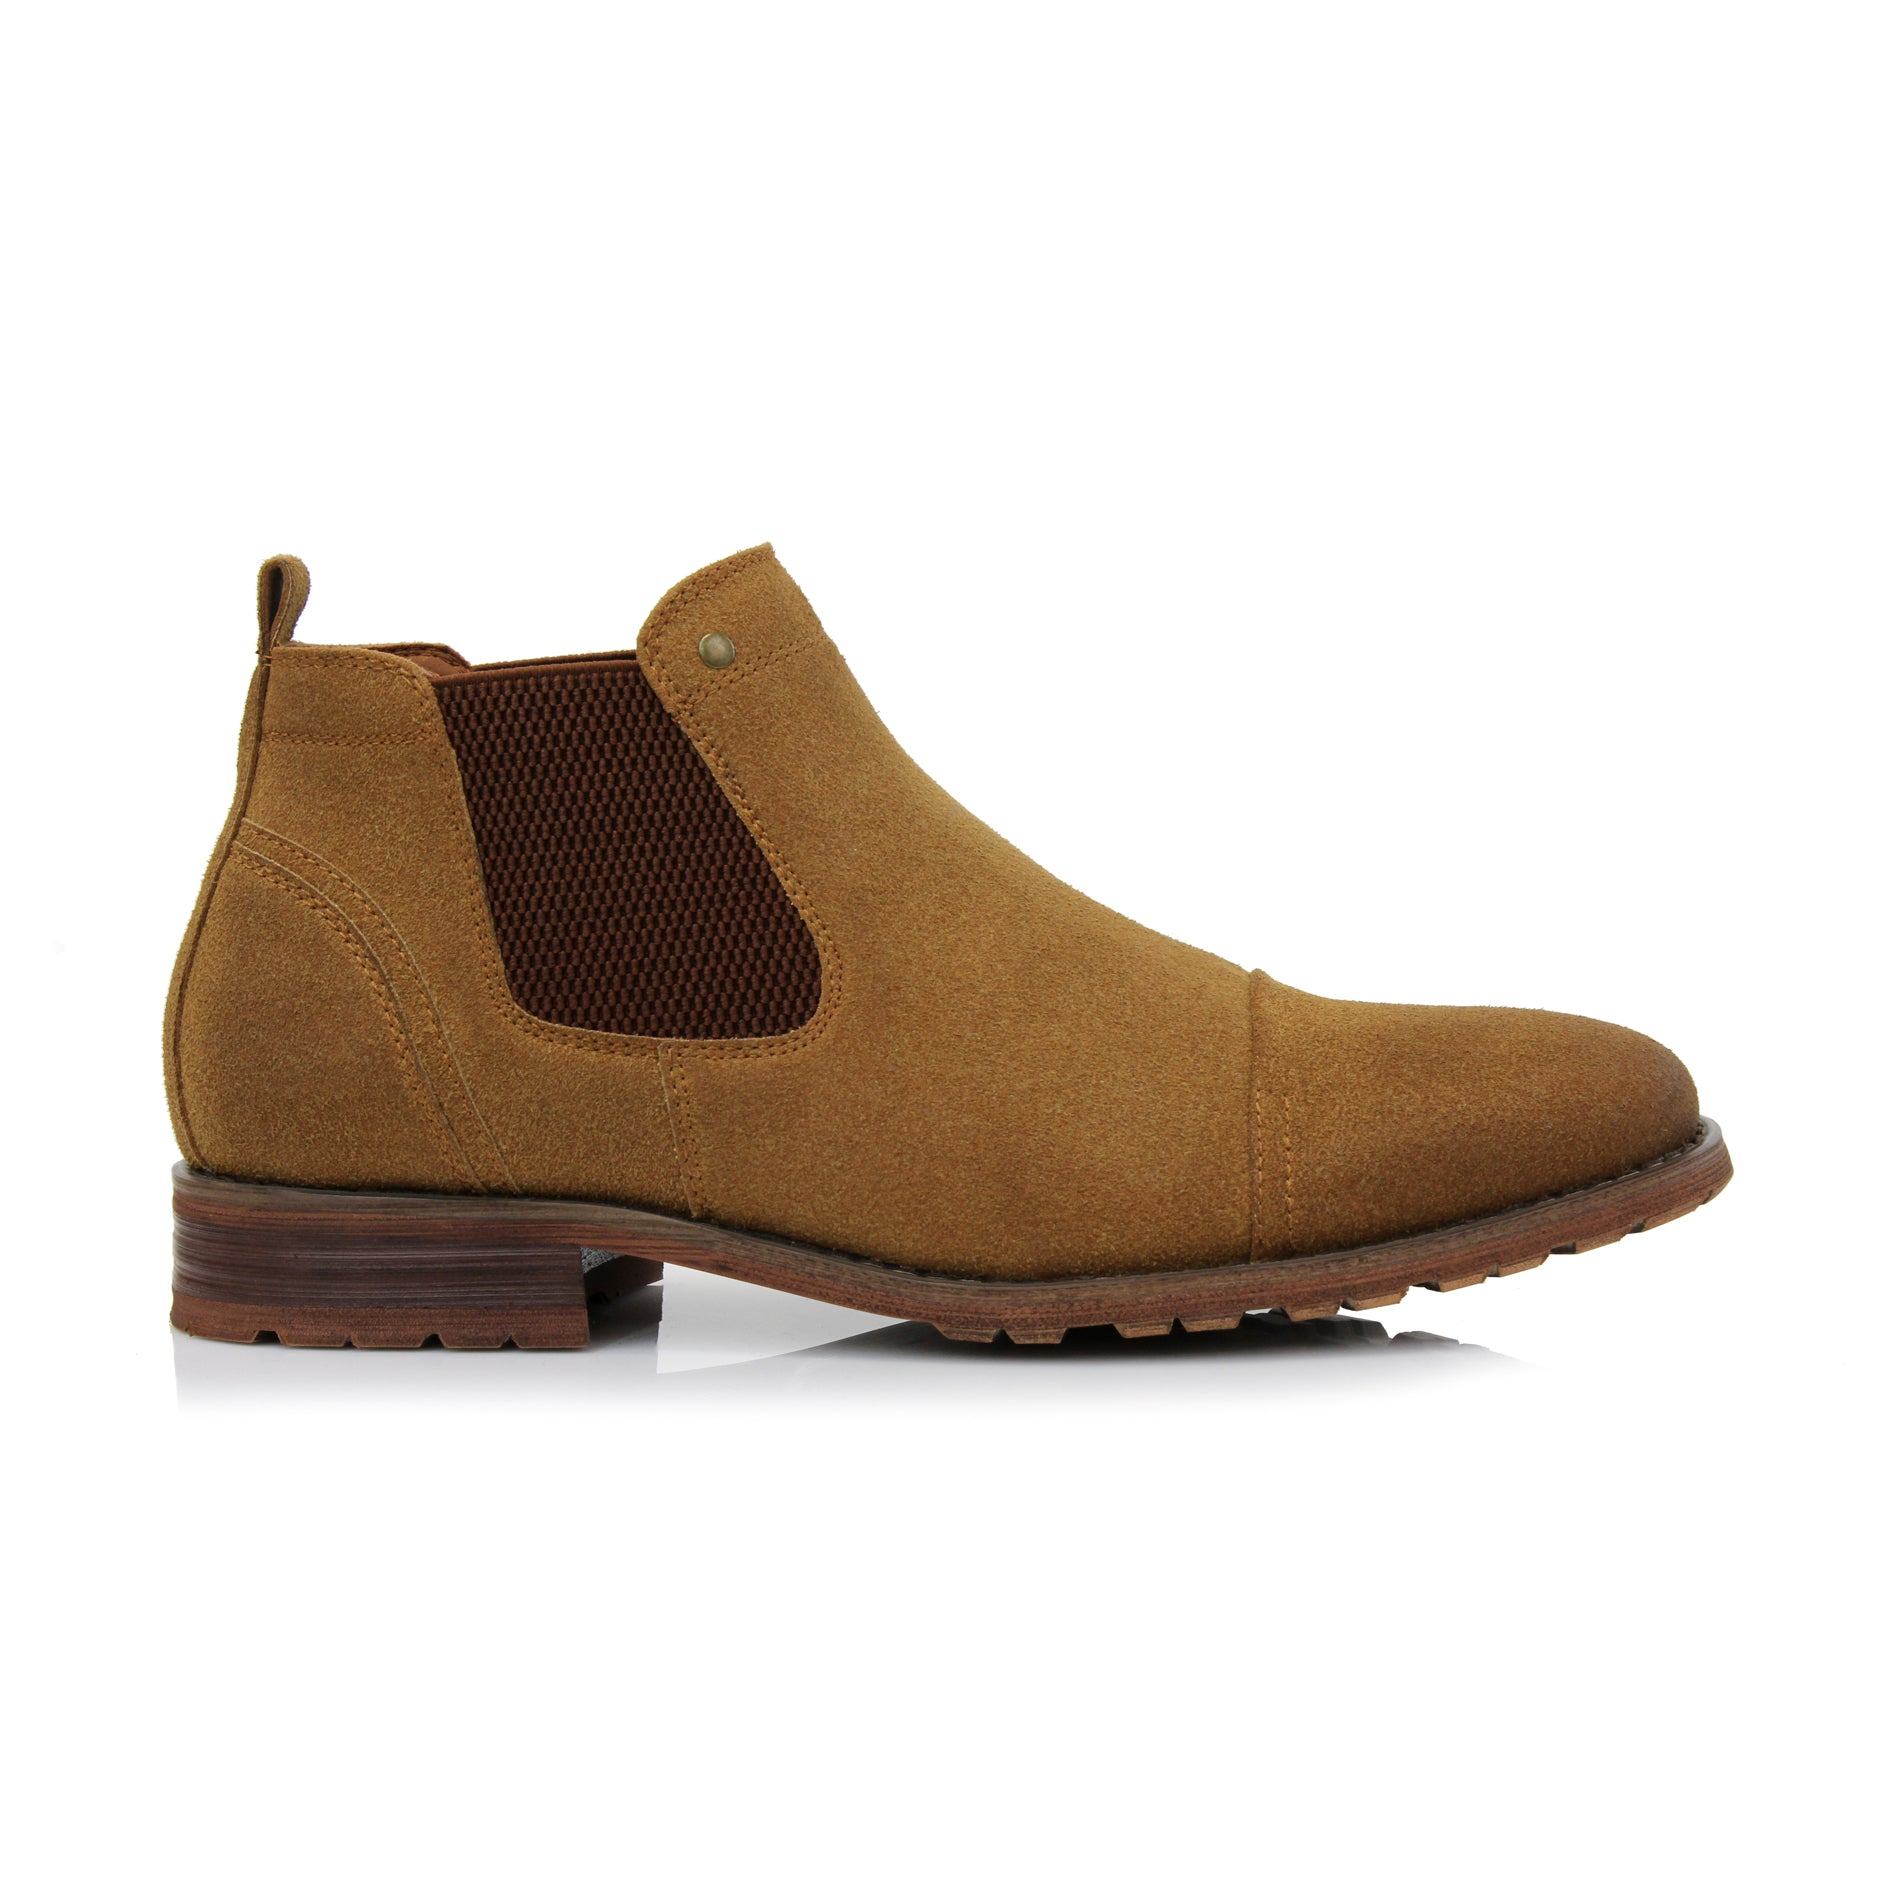 Suede Chelsea Boots | Sterling by Ferro Aldo | Conal Footwear | Outer Side Angle View